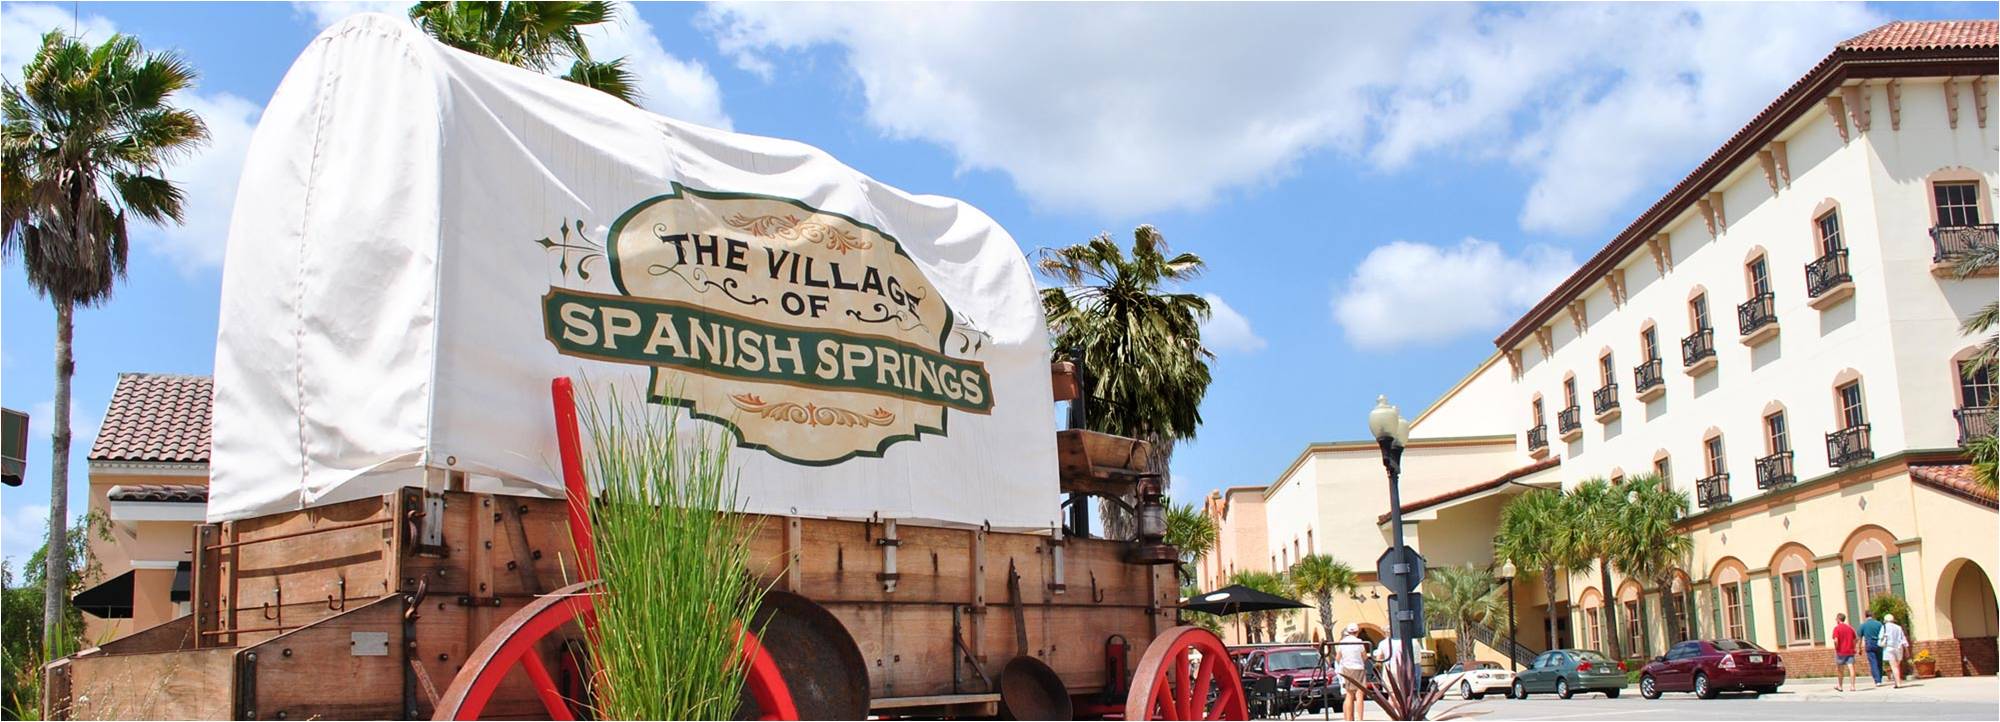 The Village of Spanish Springs